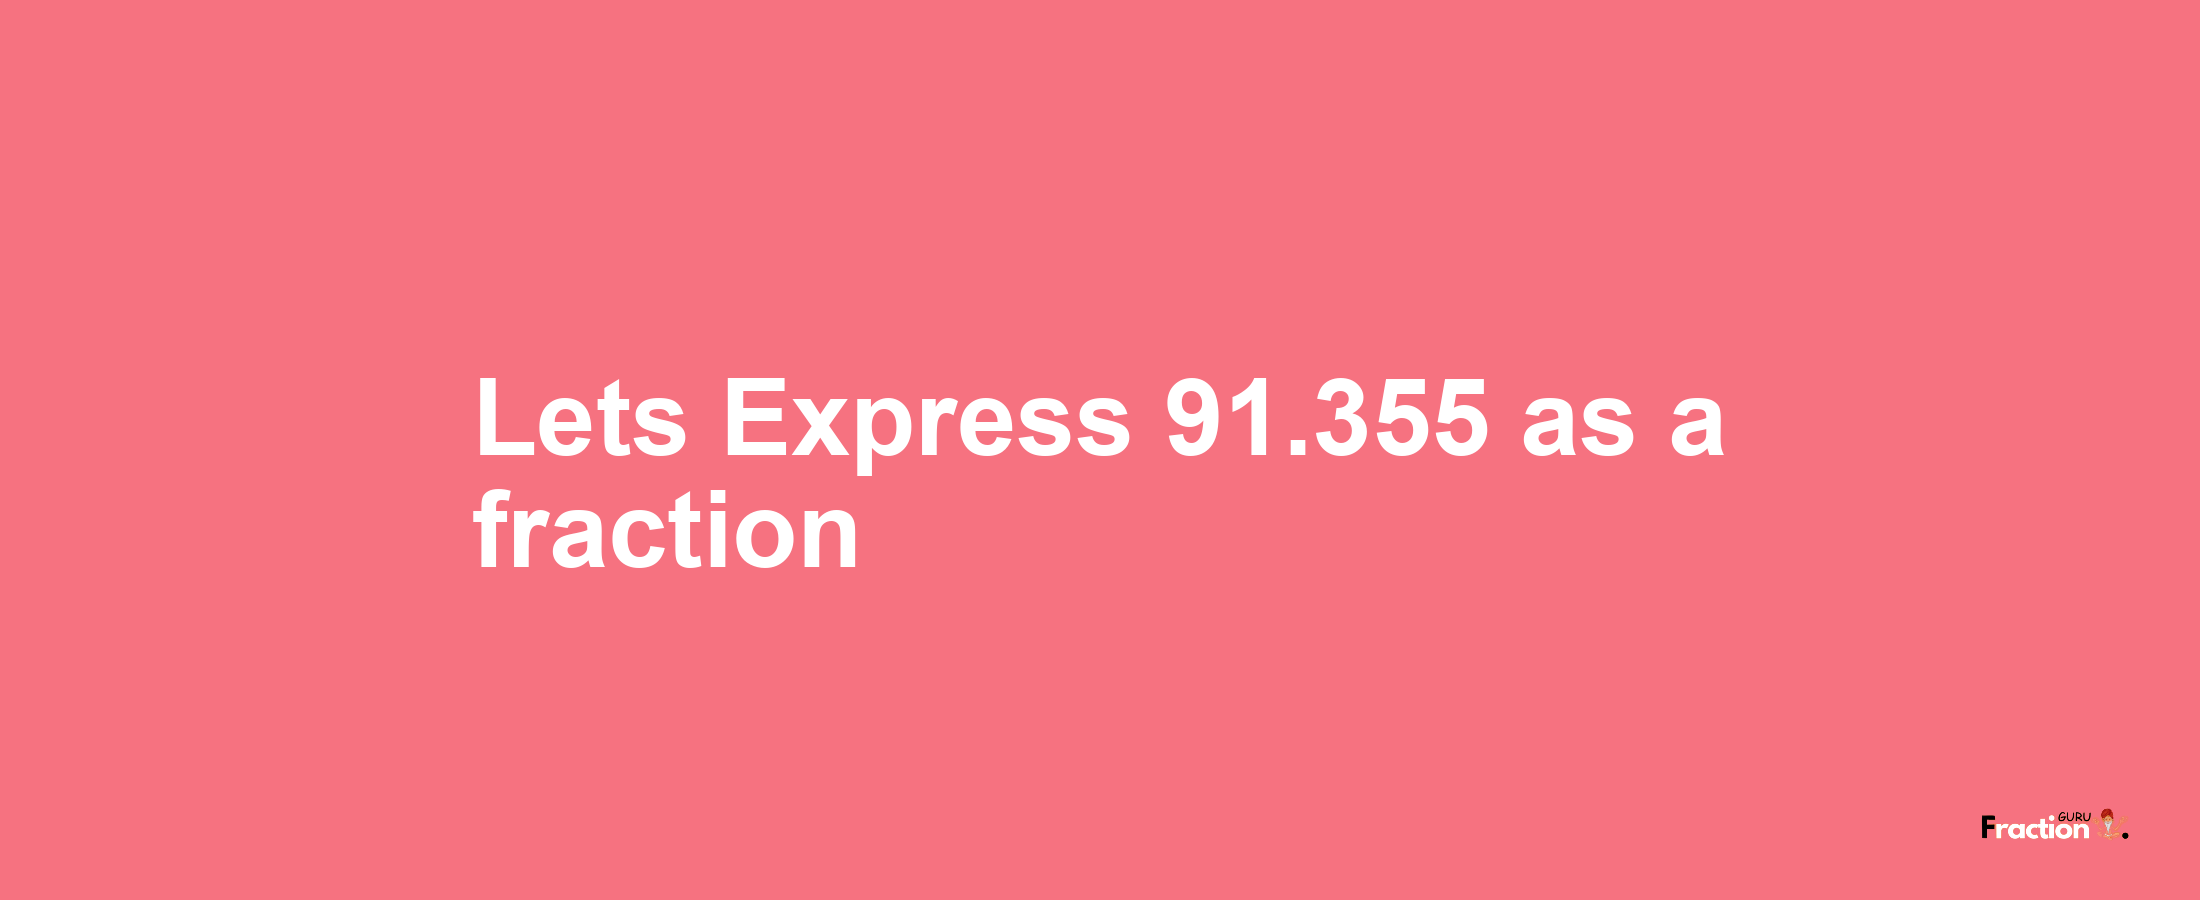 Lets Express 91.355 as afraction